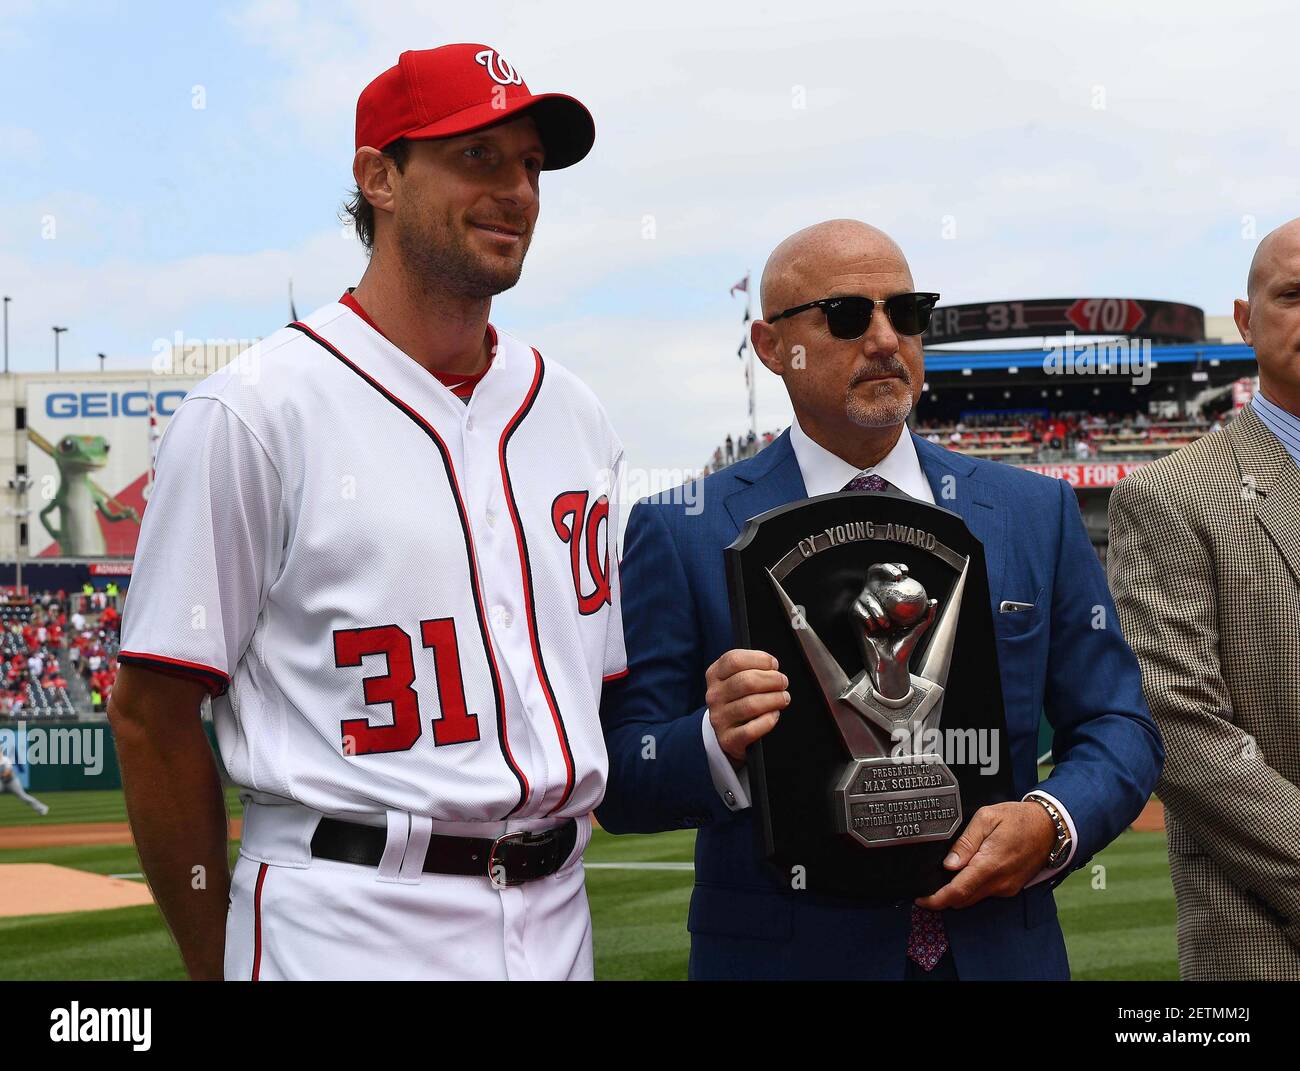 Apr 3, 2017; Washington, DC, USA; Washington Nationals starting pitcher Max Scherzer (31) receives the 2016 National League Cy Young award from general manager Mike Rizzo before the game between the Washington Nationals and the Miami Marlins at Nationals Park. Mandatory Credit: Brad Mills-USA TODAY Sports *** Please Use Credit from Credit Field *** Stock Photo